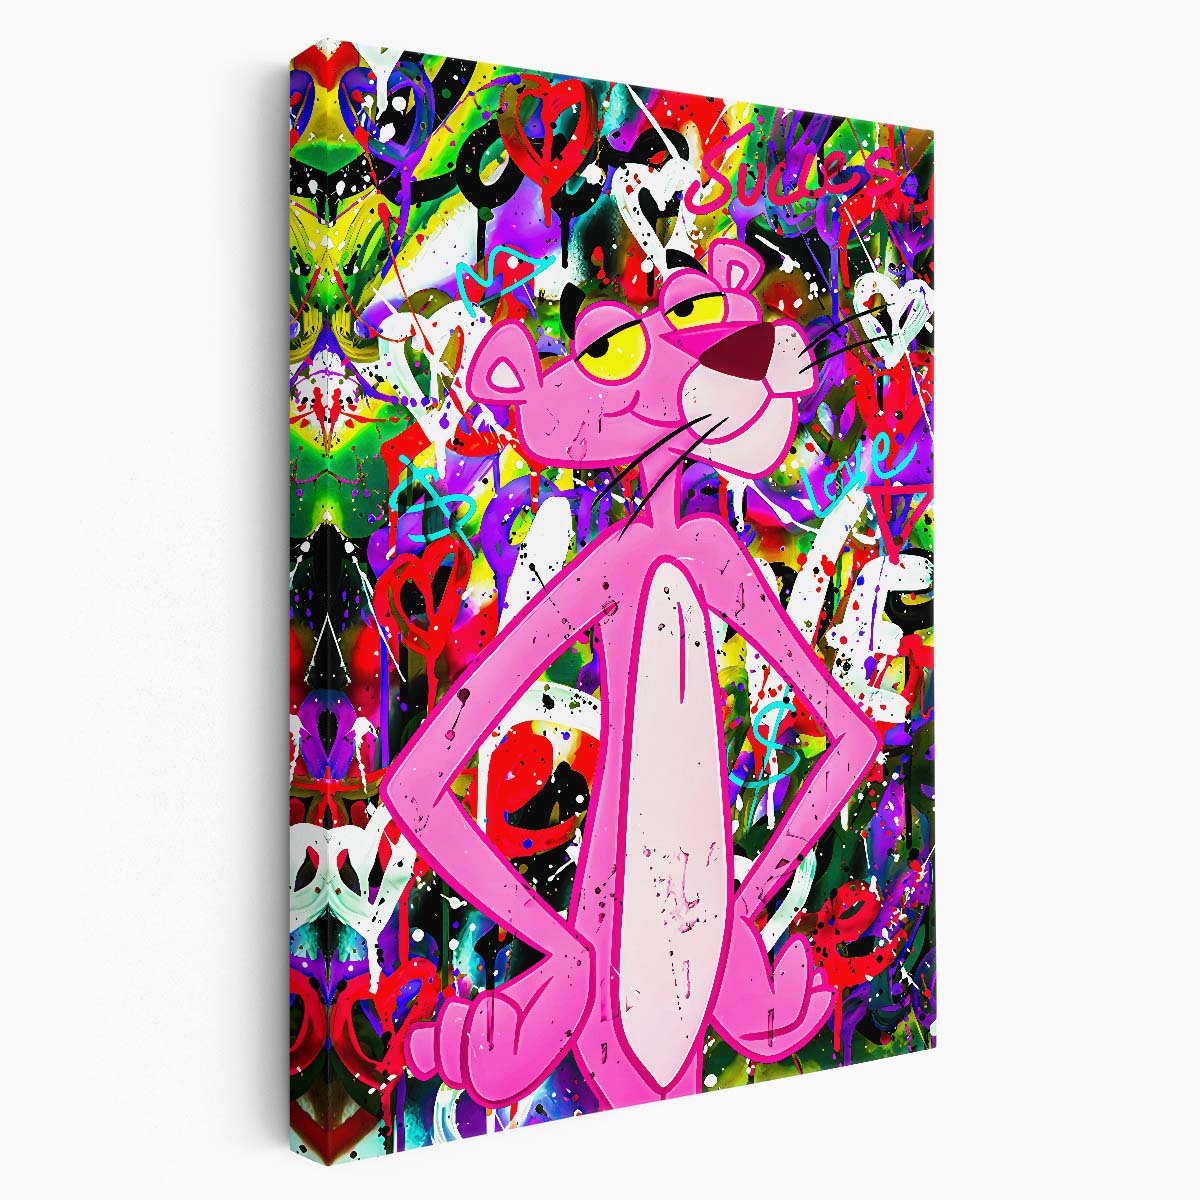 Retro Pink Panther Graffiti Wall Art by Luxuriance Designs. Made in USA.